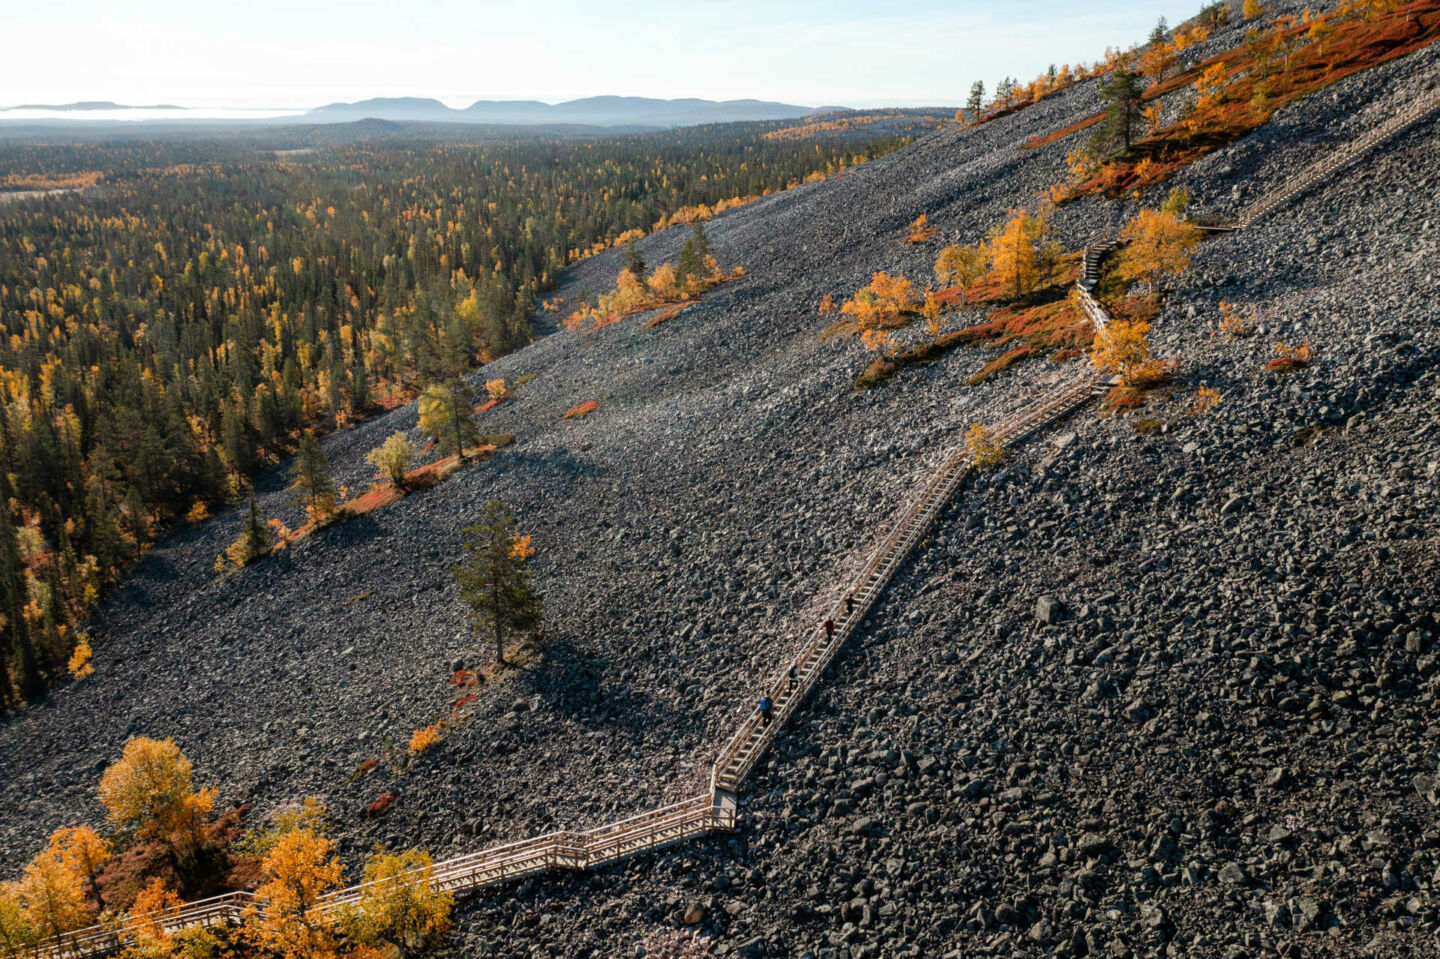 The wooden walkway over the stone field in Pyhä-Luosto, a Lapland filming location